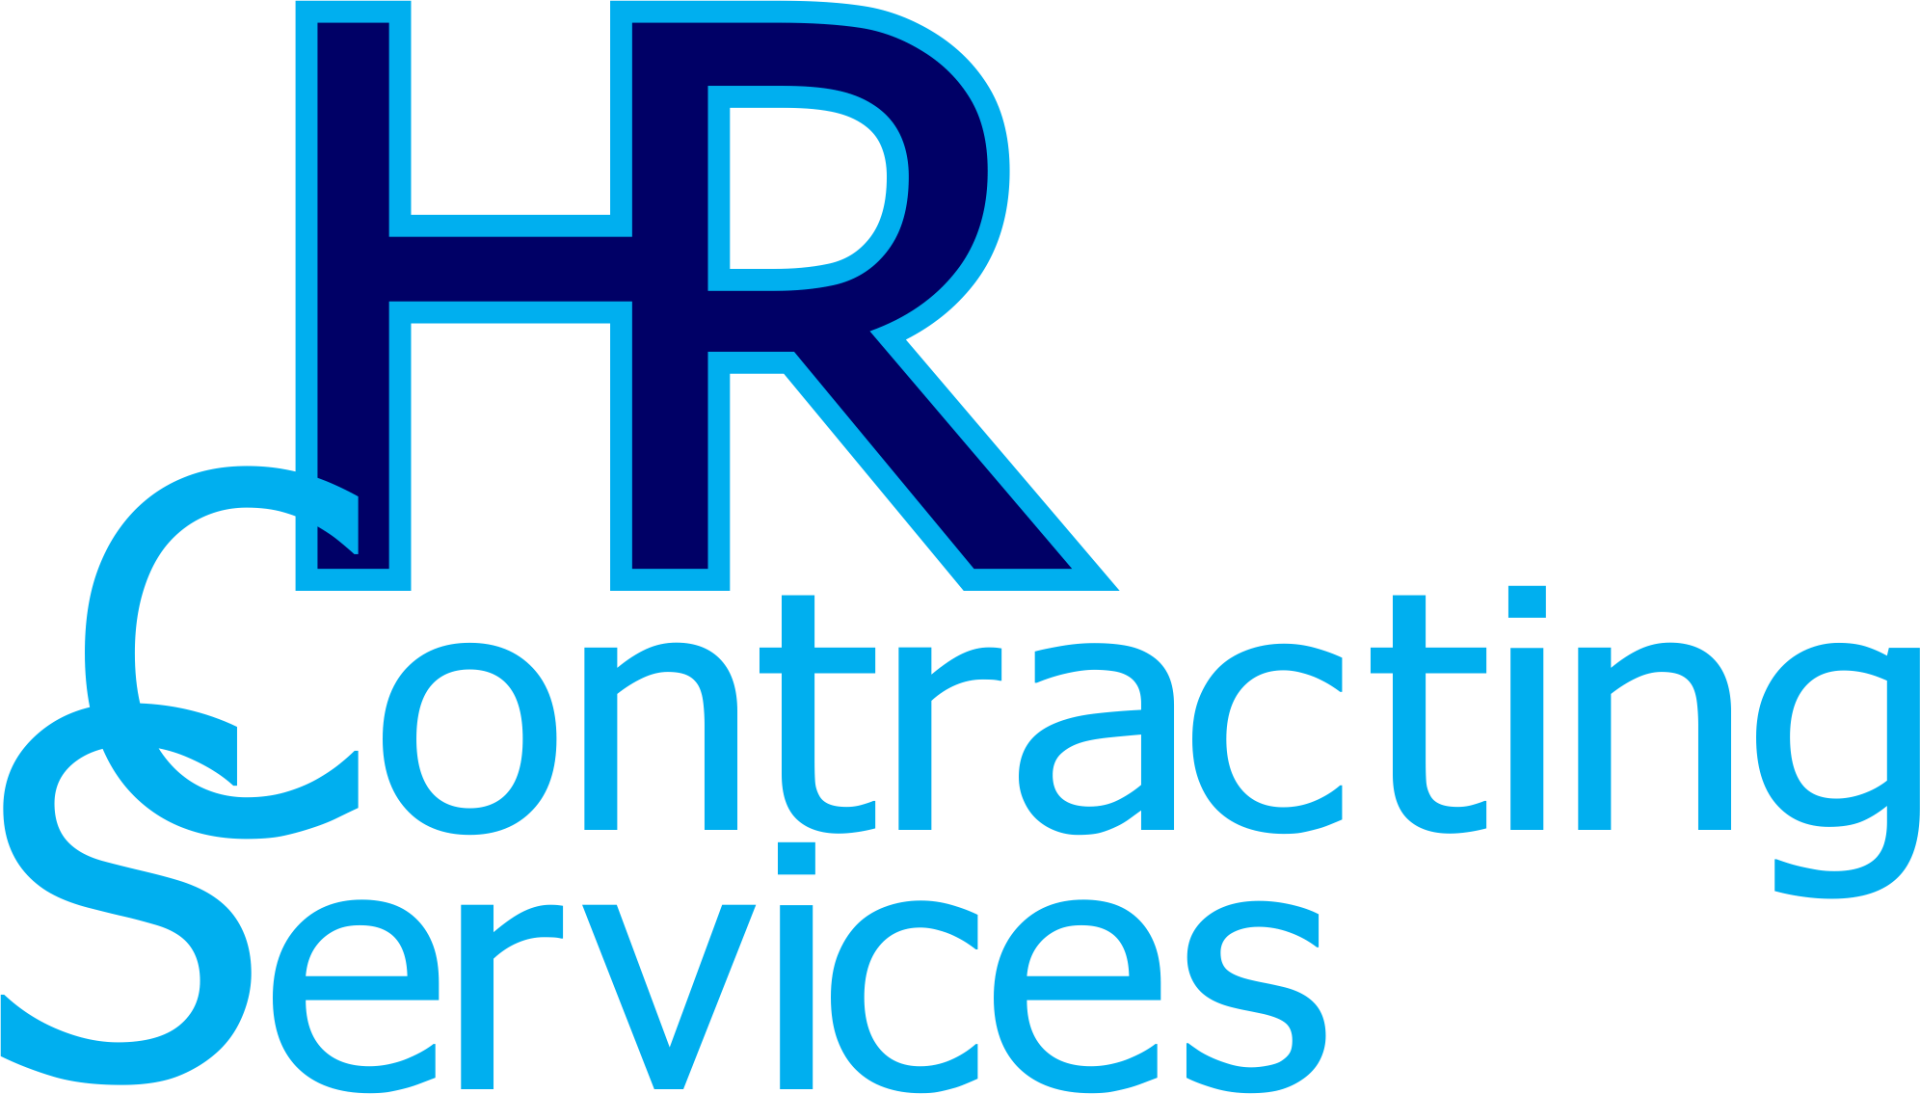 Roofing Contractor Houston Tx H R Contracting Services